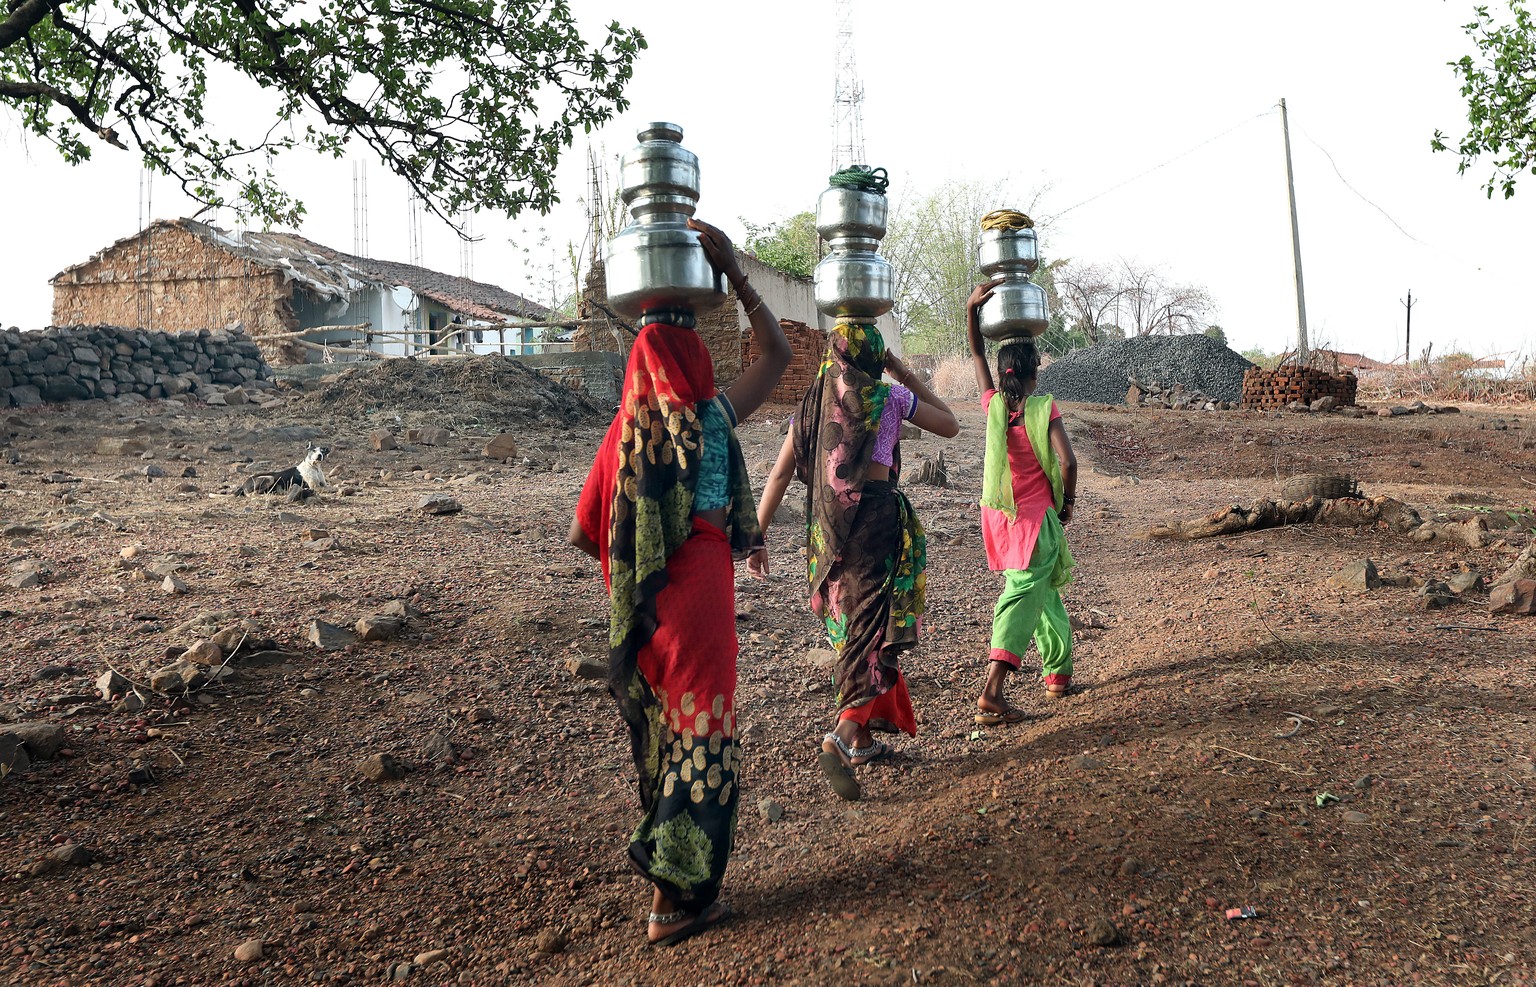 epa06777304 (08/29) Indian women walk towards their villages carrying pots filled with water in Chokka village Rahatgarh, Bundelkhand region, Madhya Pradesh, India, 16 May 2018. Huge stretches of Madh ...